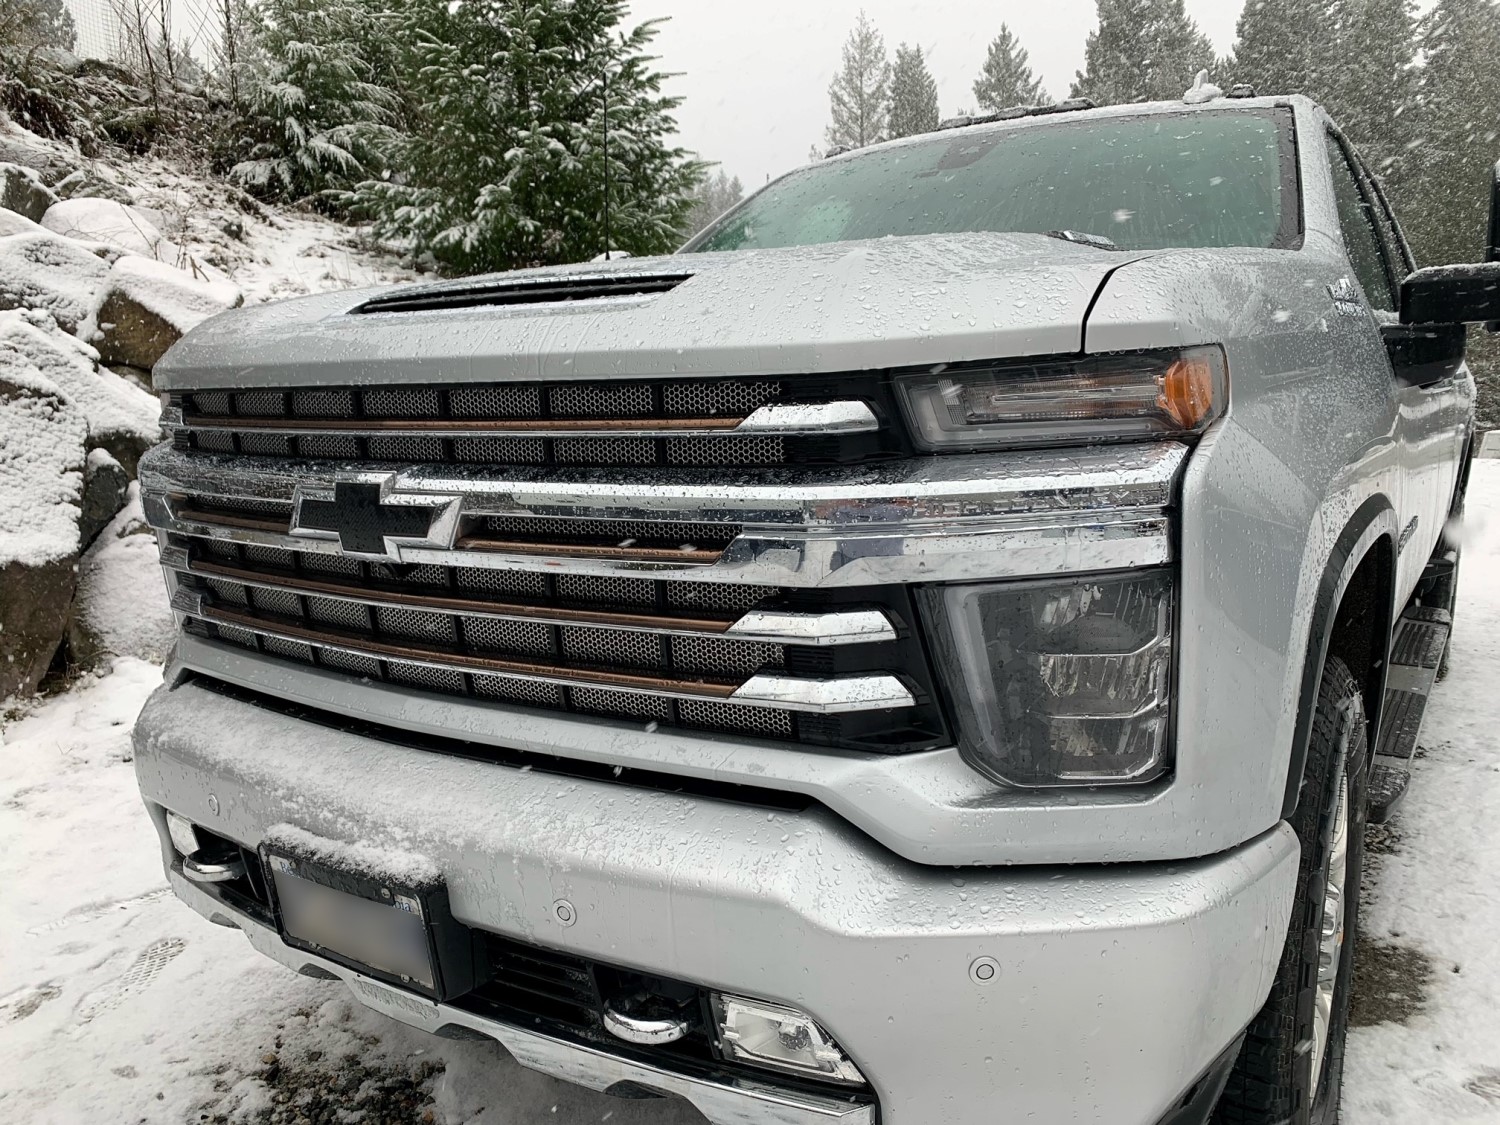 New Chevy Truck Braving the Snow with Unique Hexagon Grille Mesh